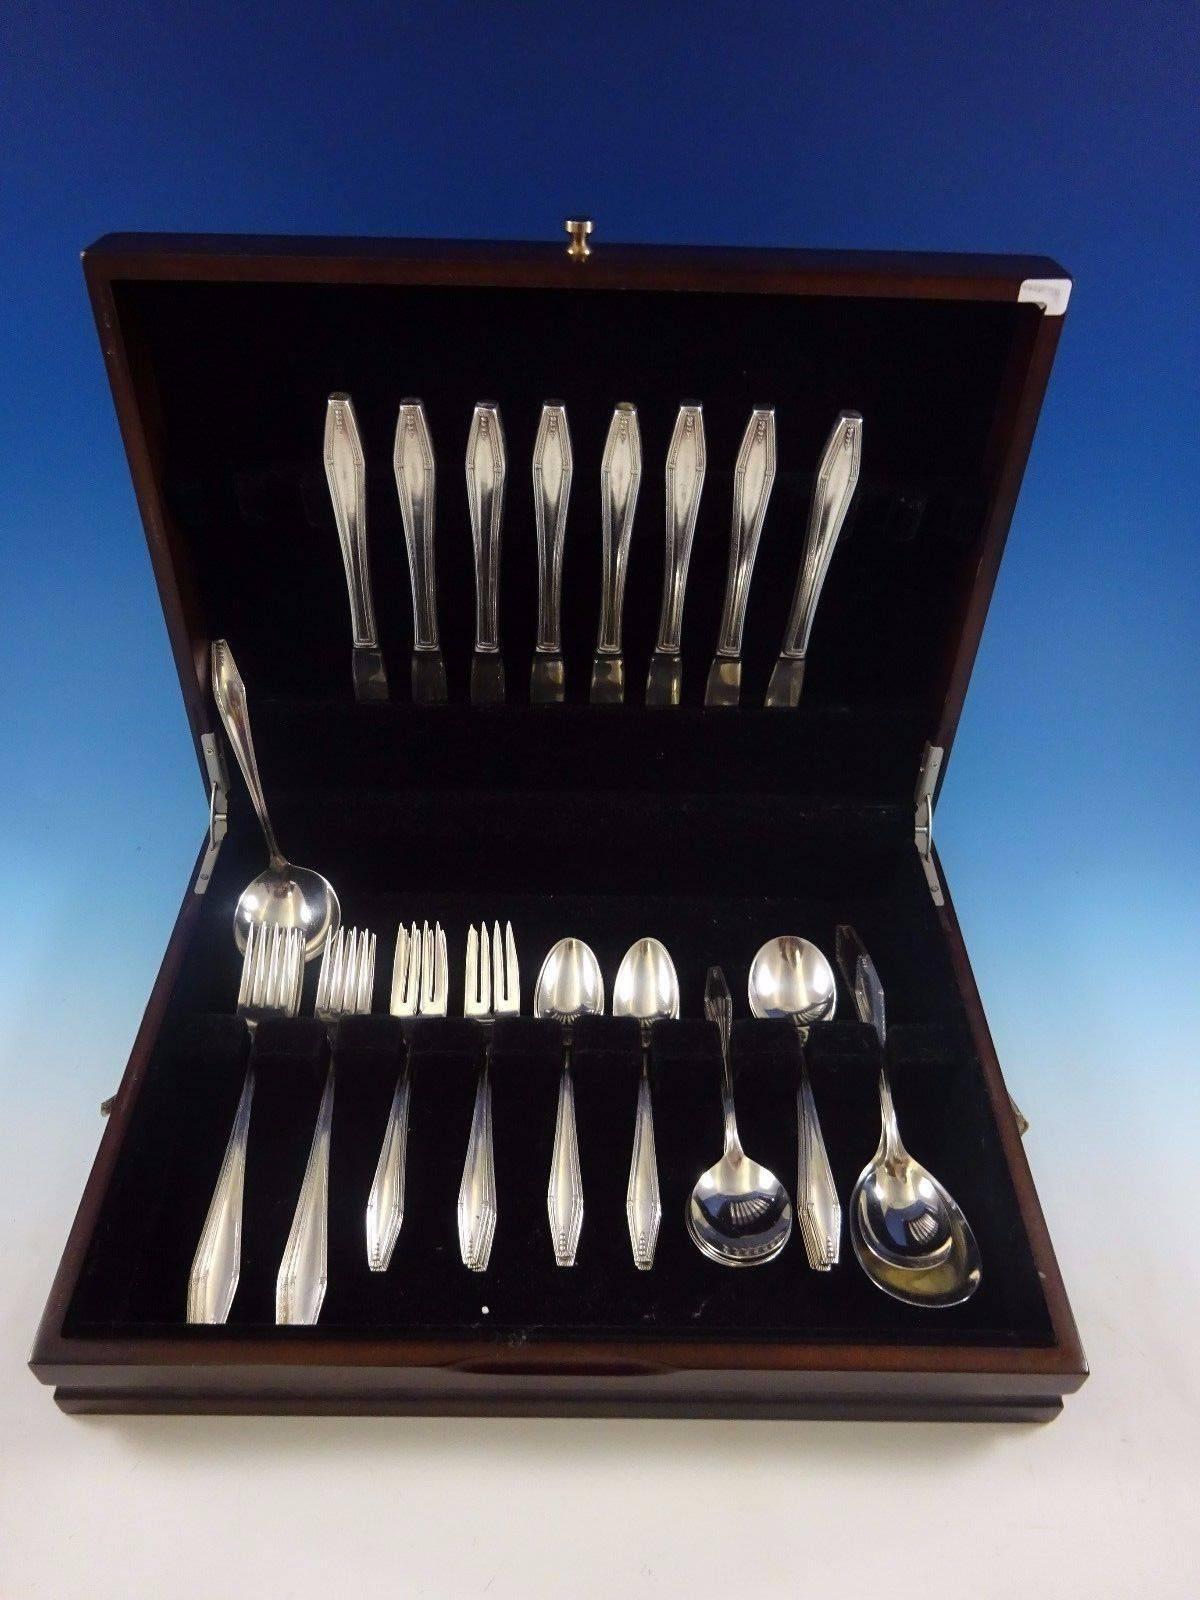 Formality by State House sterling silver flatware set of 43 pieces. This set includes:

Eight knives, 8 1/2